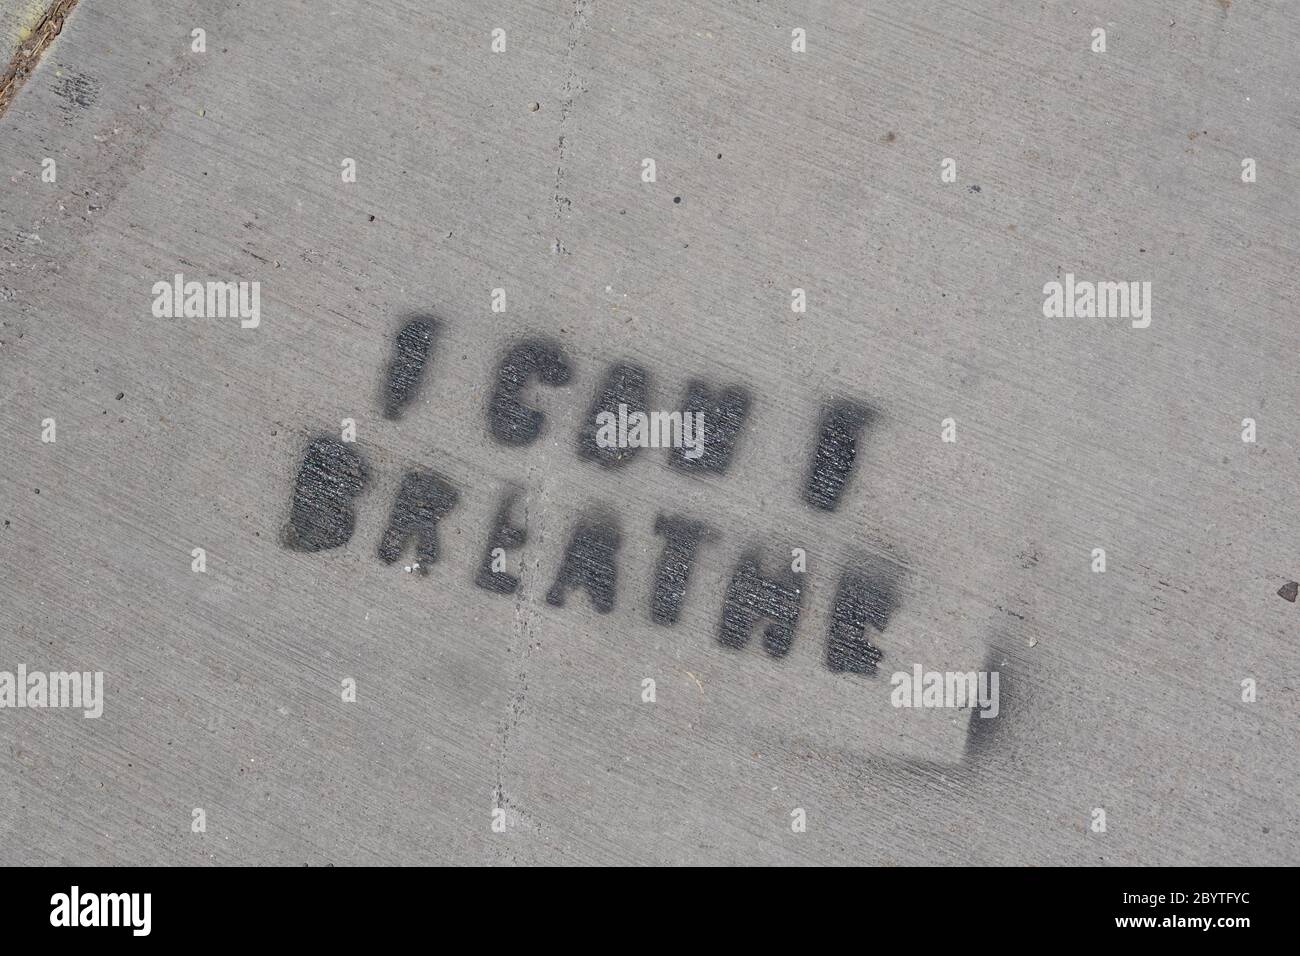 I can’t breathe is spray painted on a sidewalk. Stock Photo